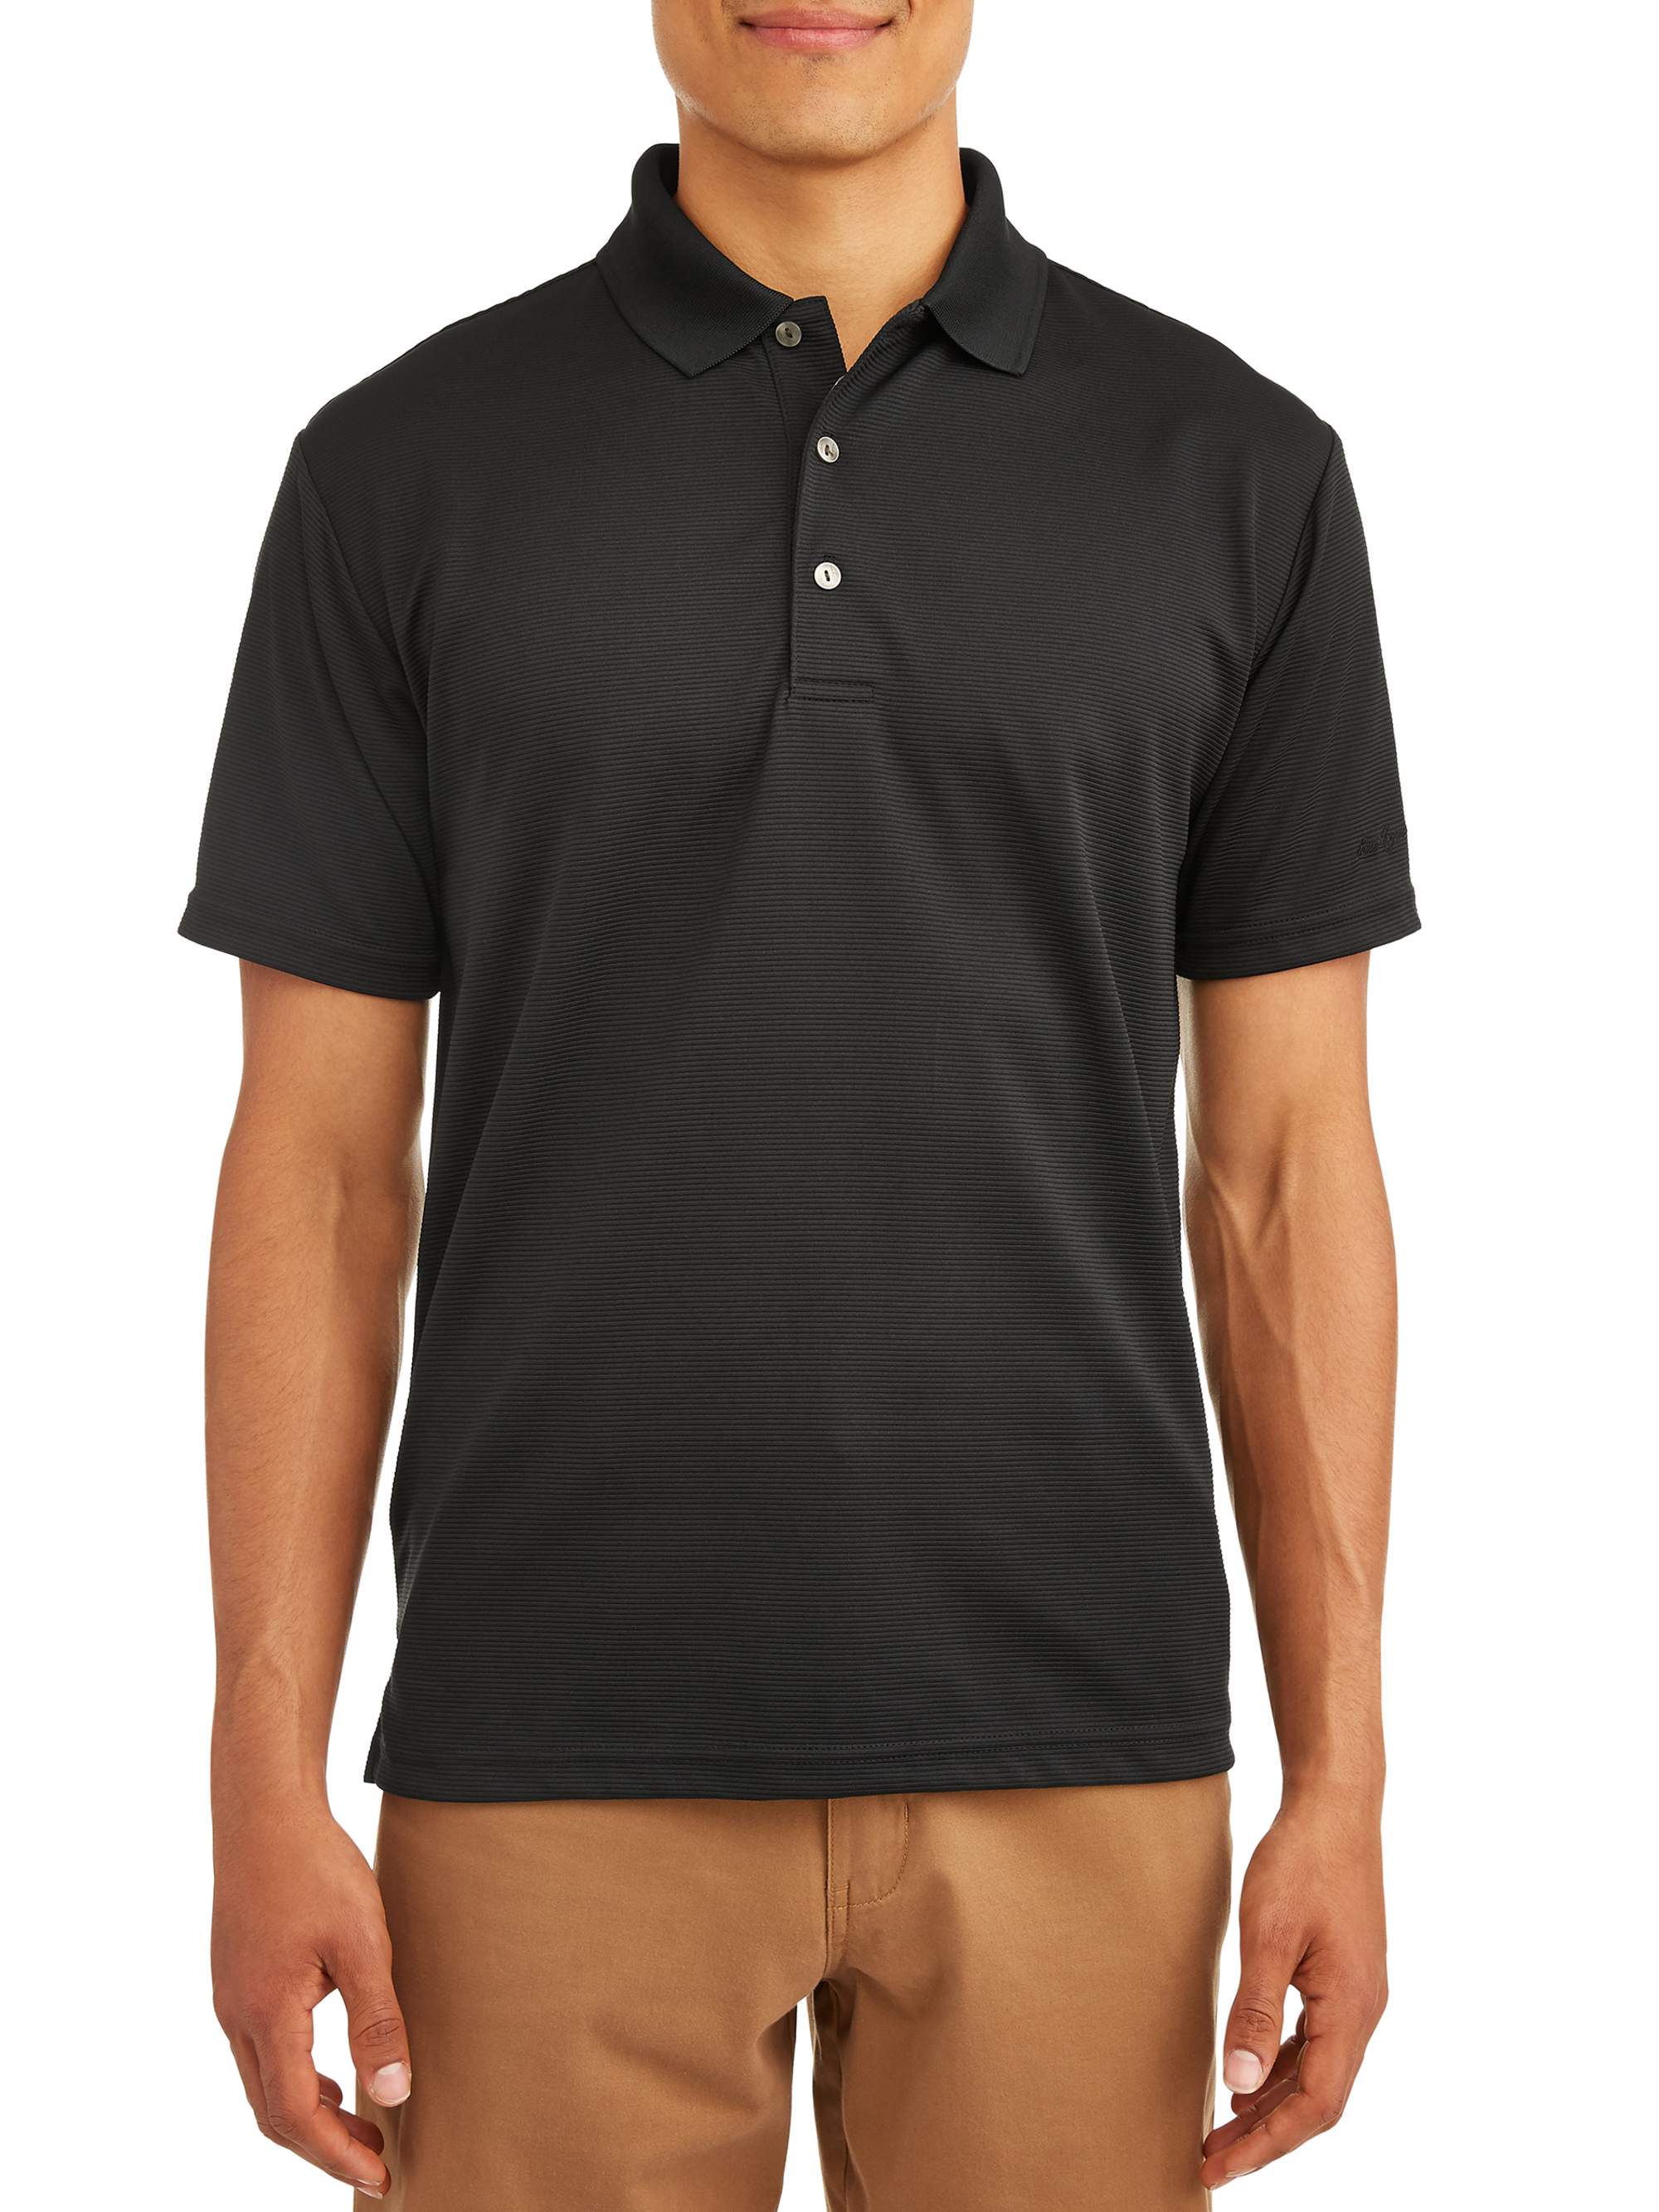 Ben Hogan Men's & Big Men's Performance Easy Care Solid Short Sleeve Polo Shirt, up to 5XL - image 1 of 6